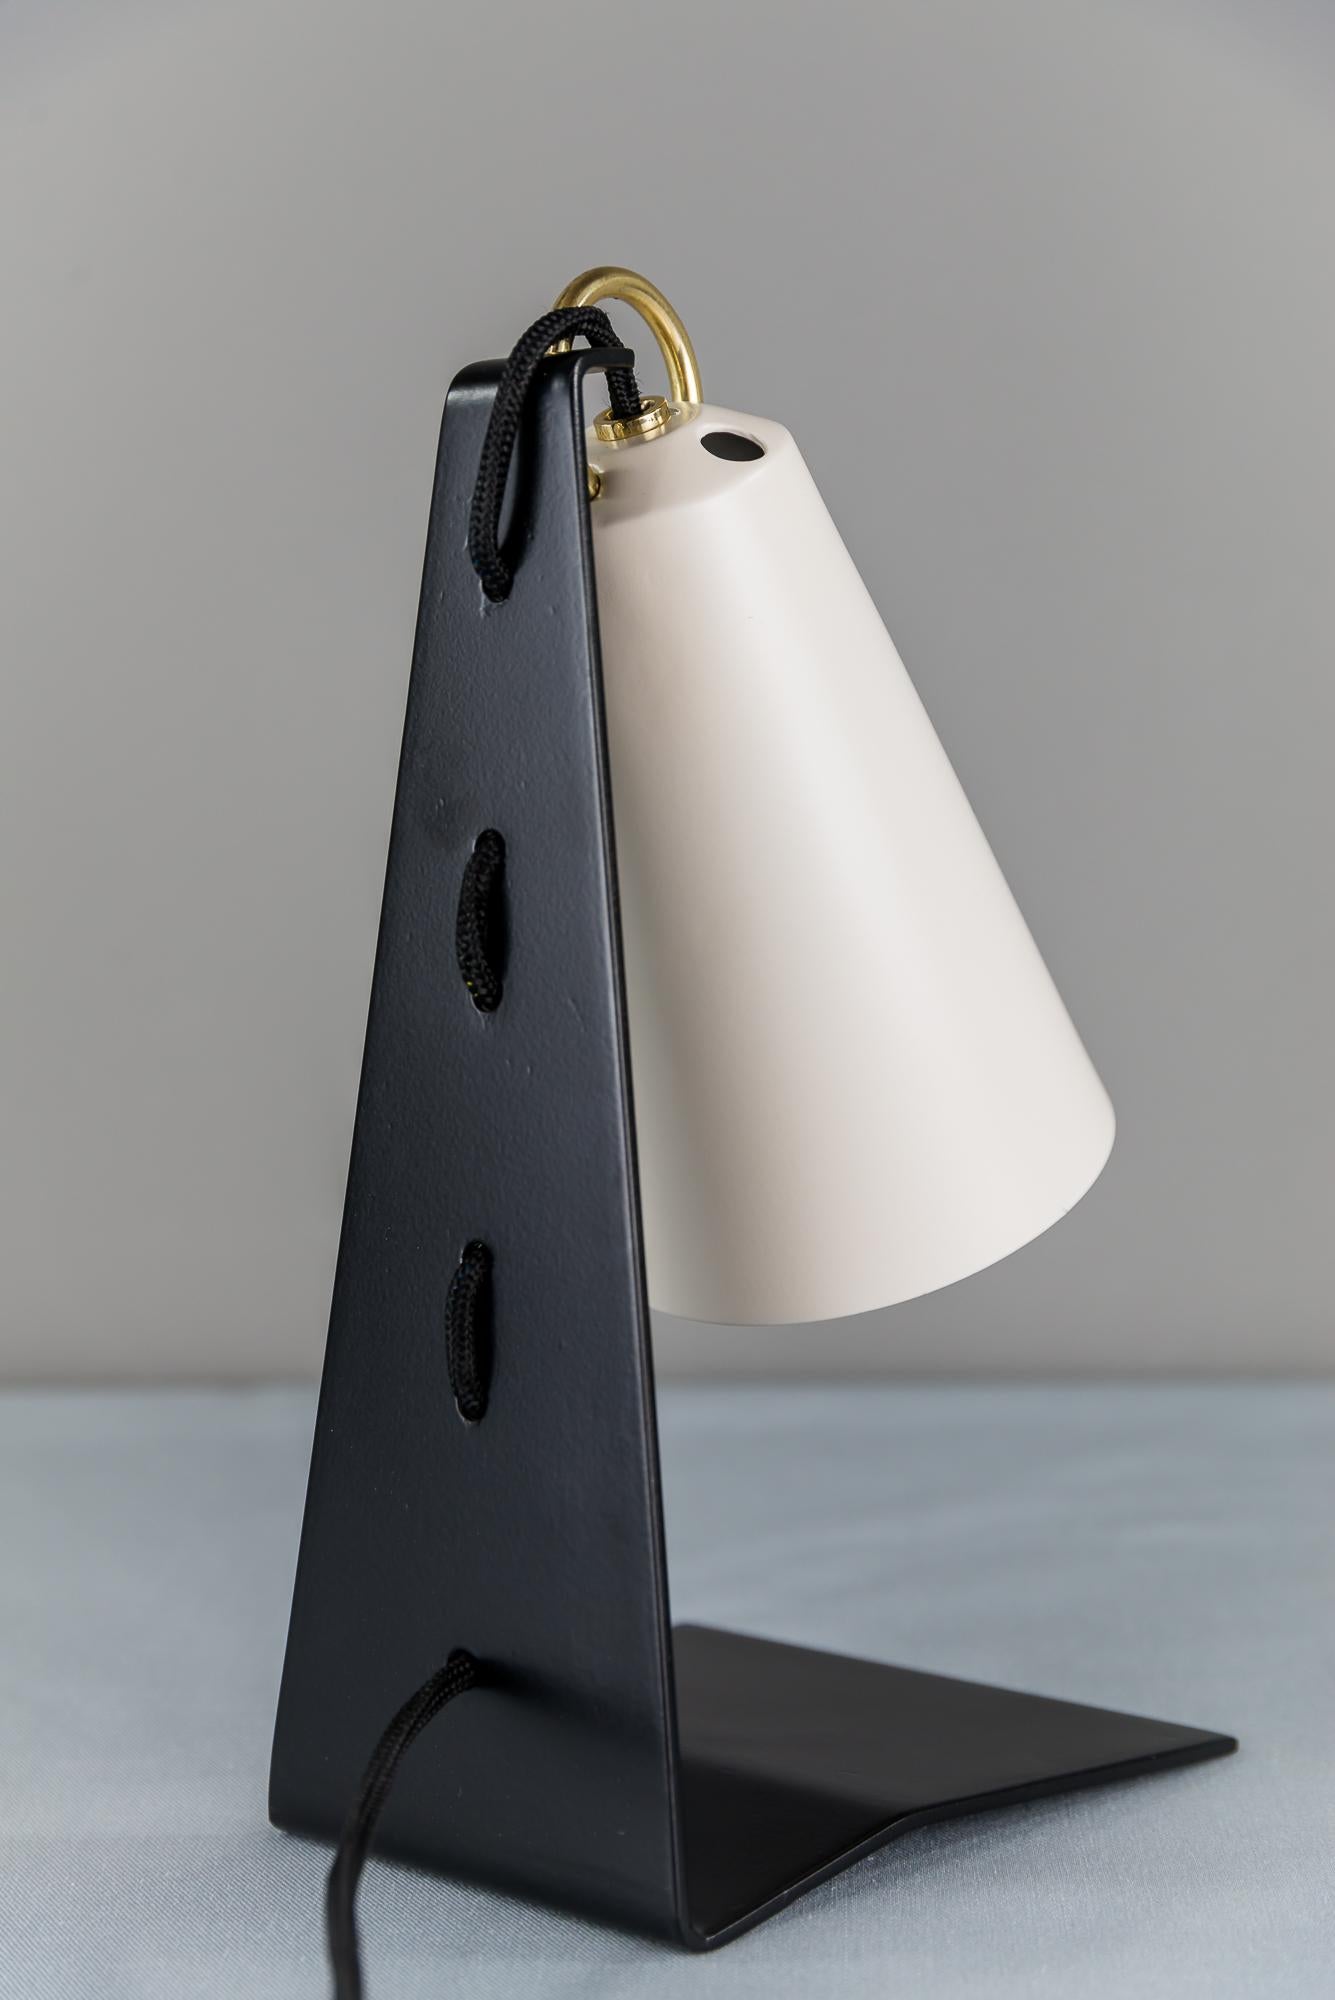 Black and White Austrian Modernist Metall Table Lamp Hook by J. T. Kalmar 1960s For Sale 5